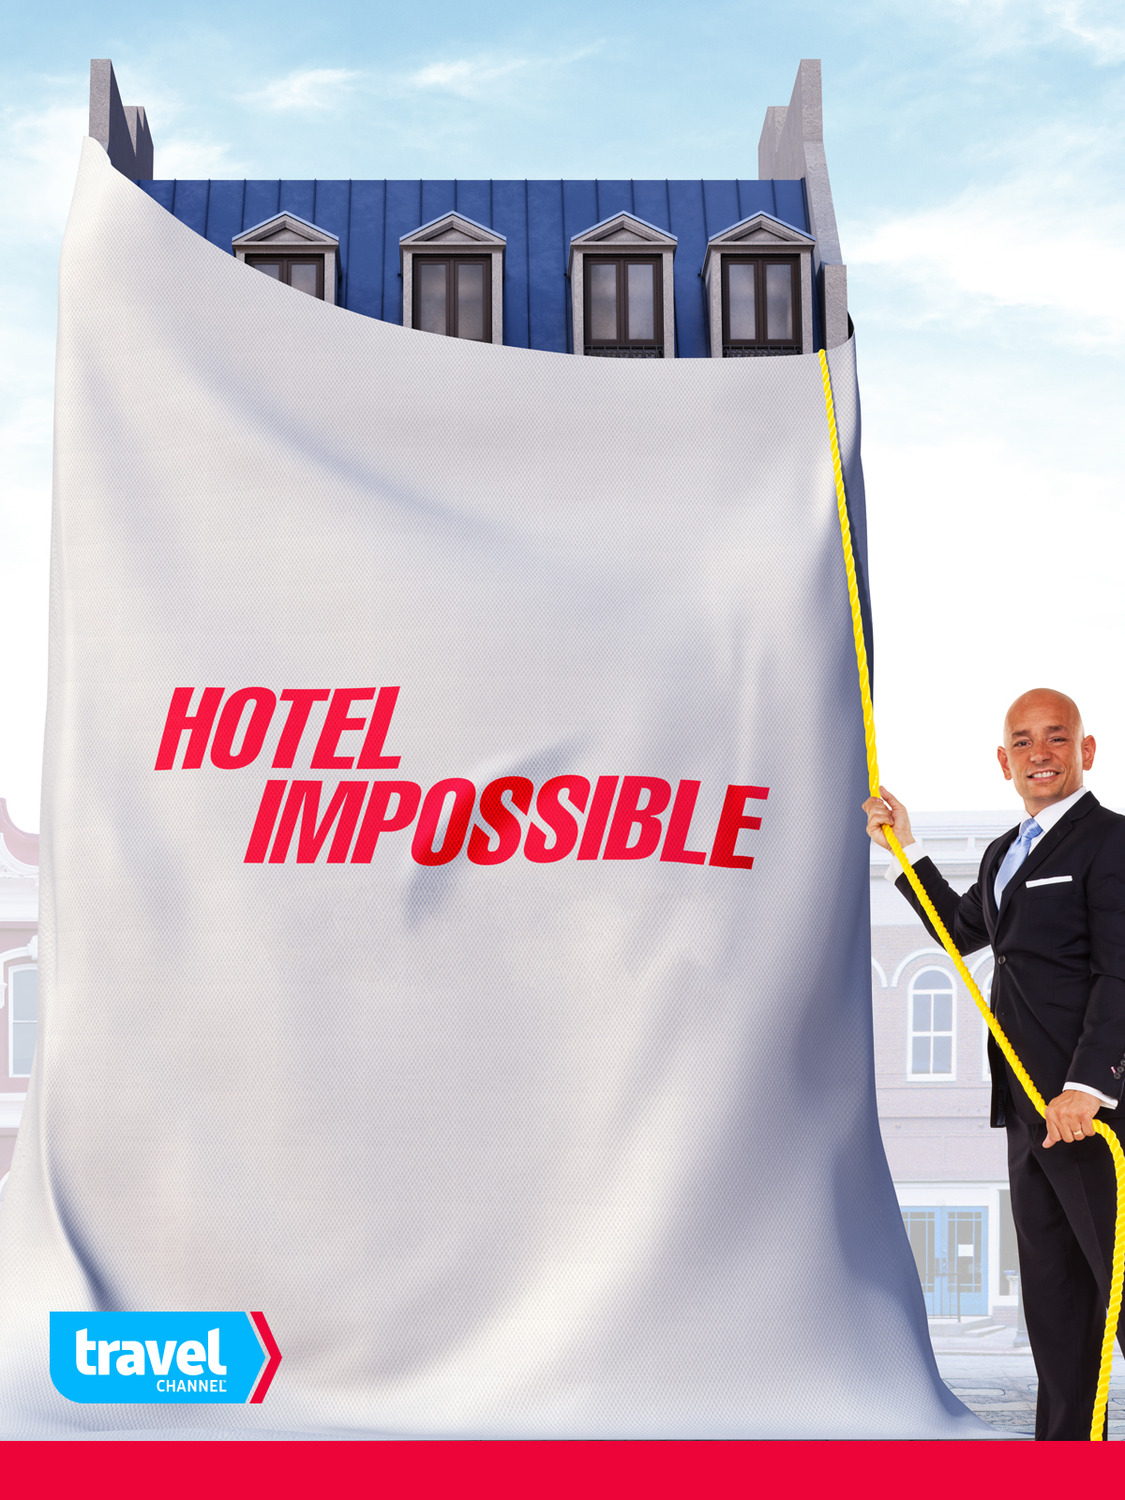 Extra Large TV Poster Image for Hotel Impossible (#4 of 6)